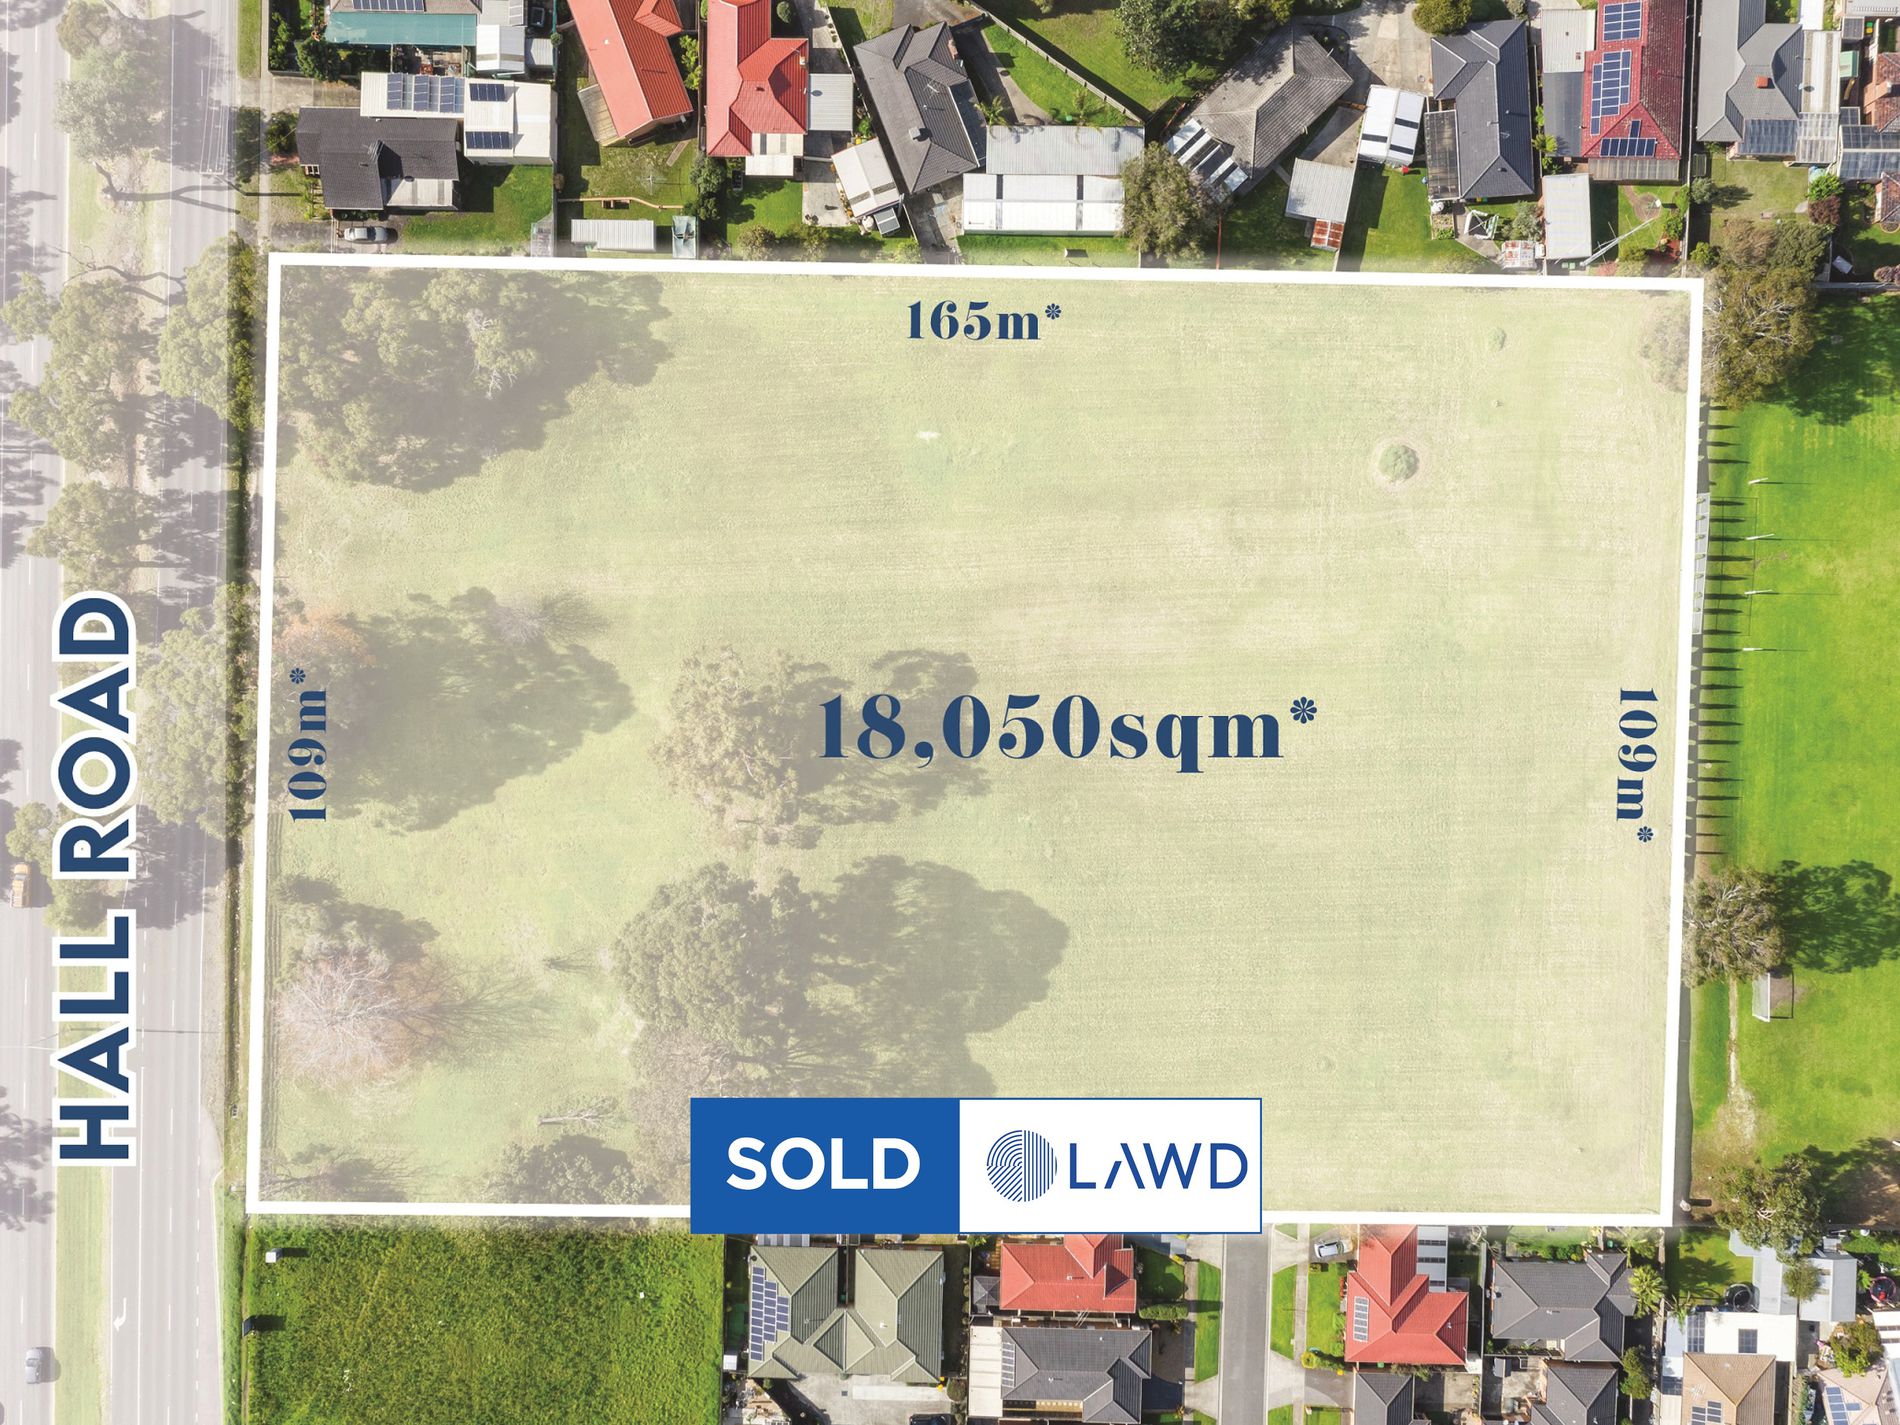 42 & 44-50 Hall Road, Carrum Downs